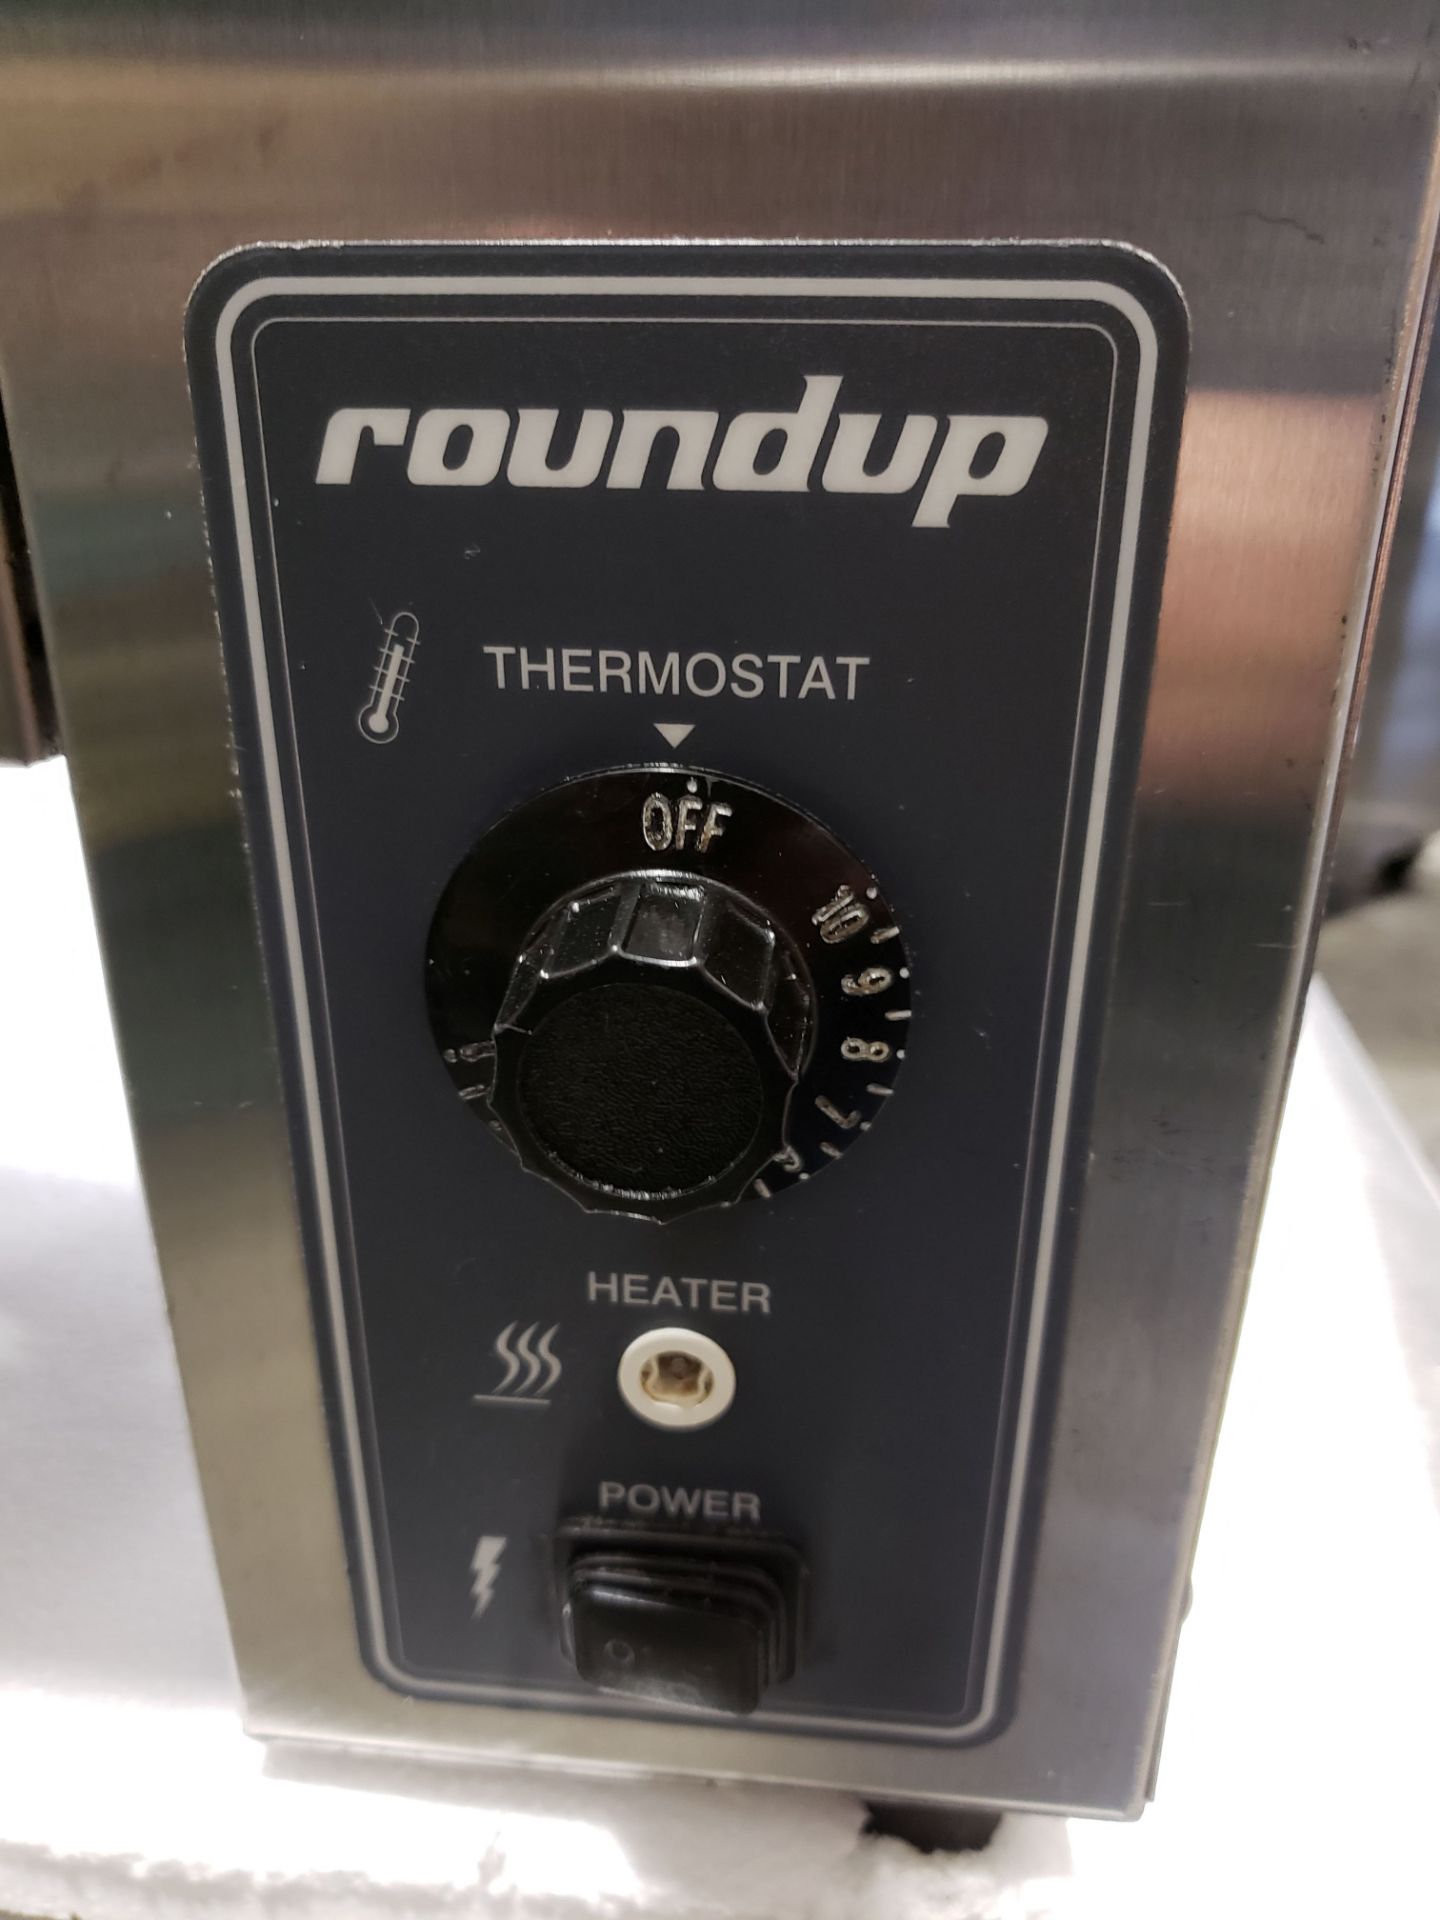 Roundup Vertical Contact Toaster - Model VCT-1000CF - Image 2 of 7